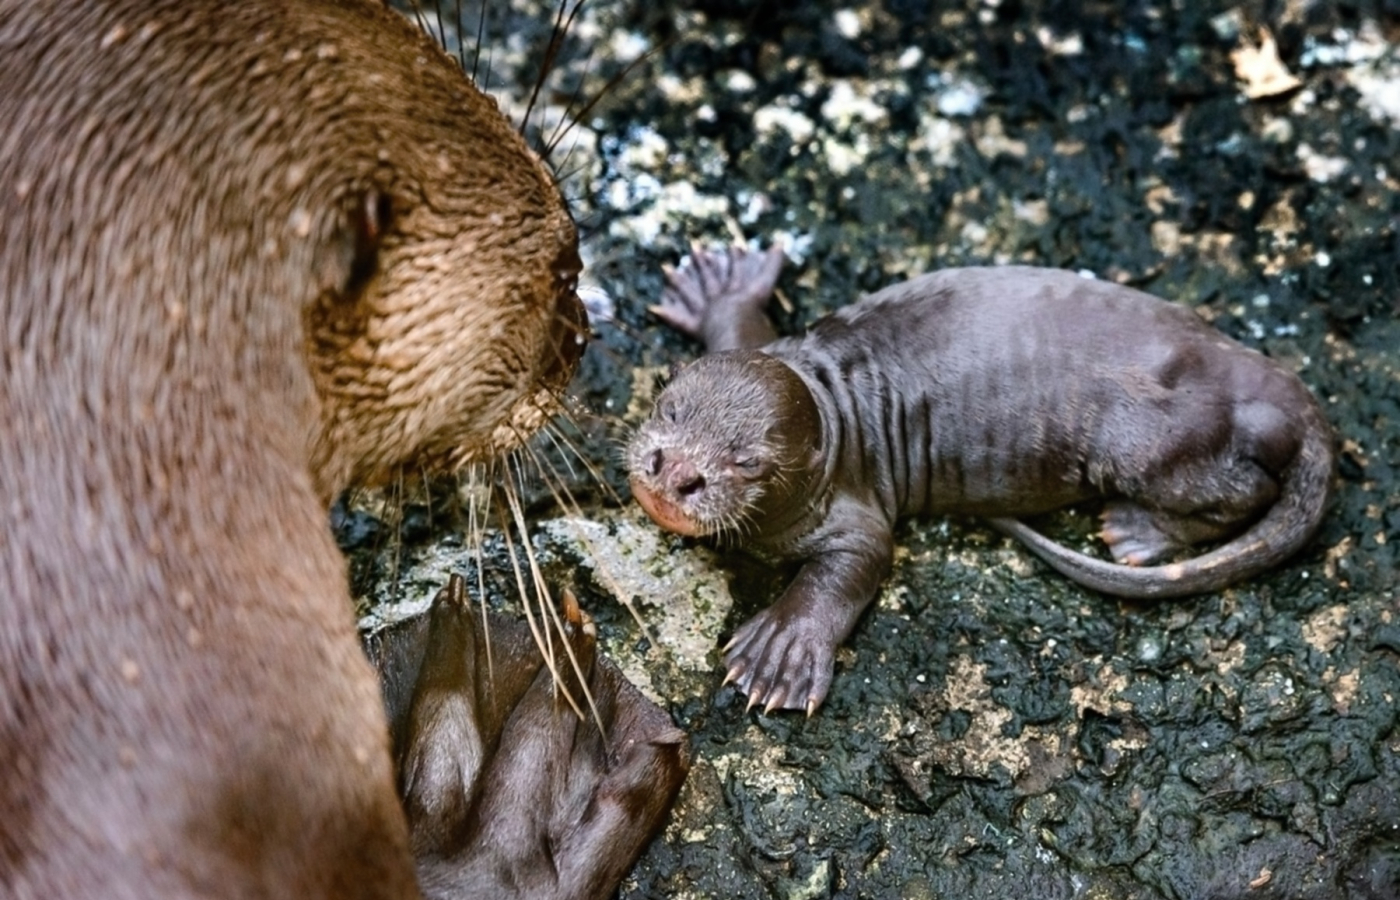 We have three giant baby otters!